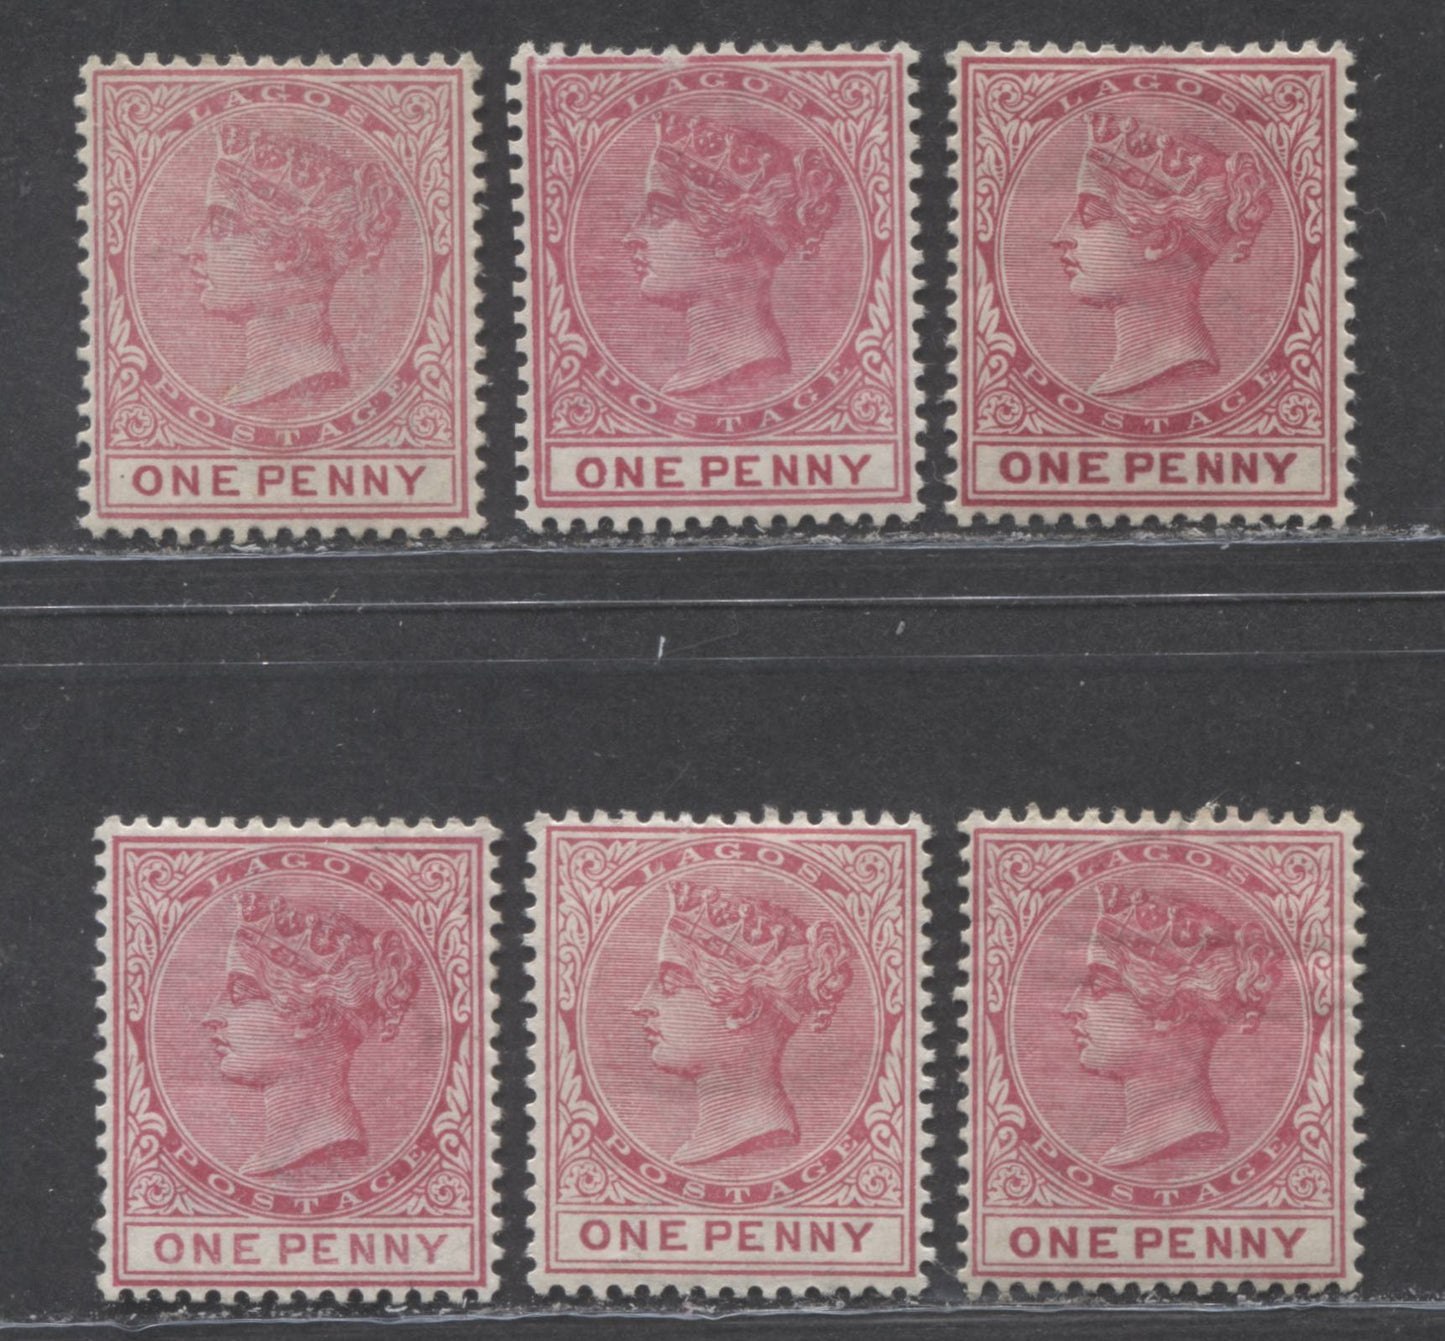 Lot 261 Lagos SG#22 (SC#15) 1d Carmine, Queen Victoria, 1884-1886 Second Crown CA Watermarked Issue, A Mint Group of Six Mid Period Printings, Likely Between 1893 and 1898, 2022 Scott Classic Cat. $13.50 USD For The Commonest Printings